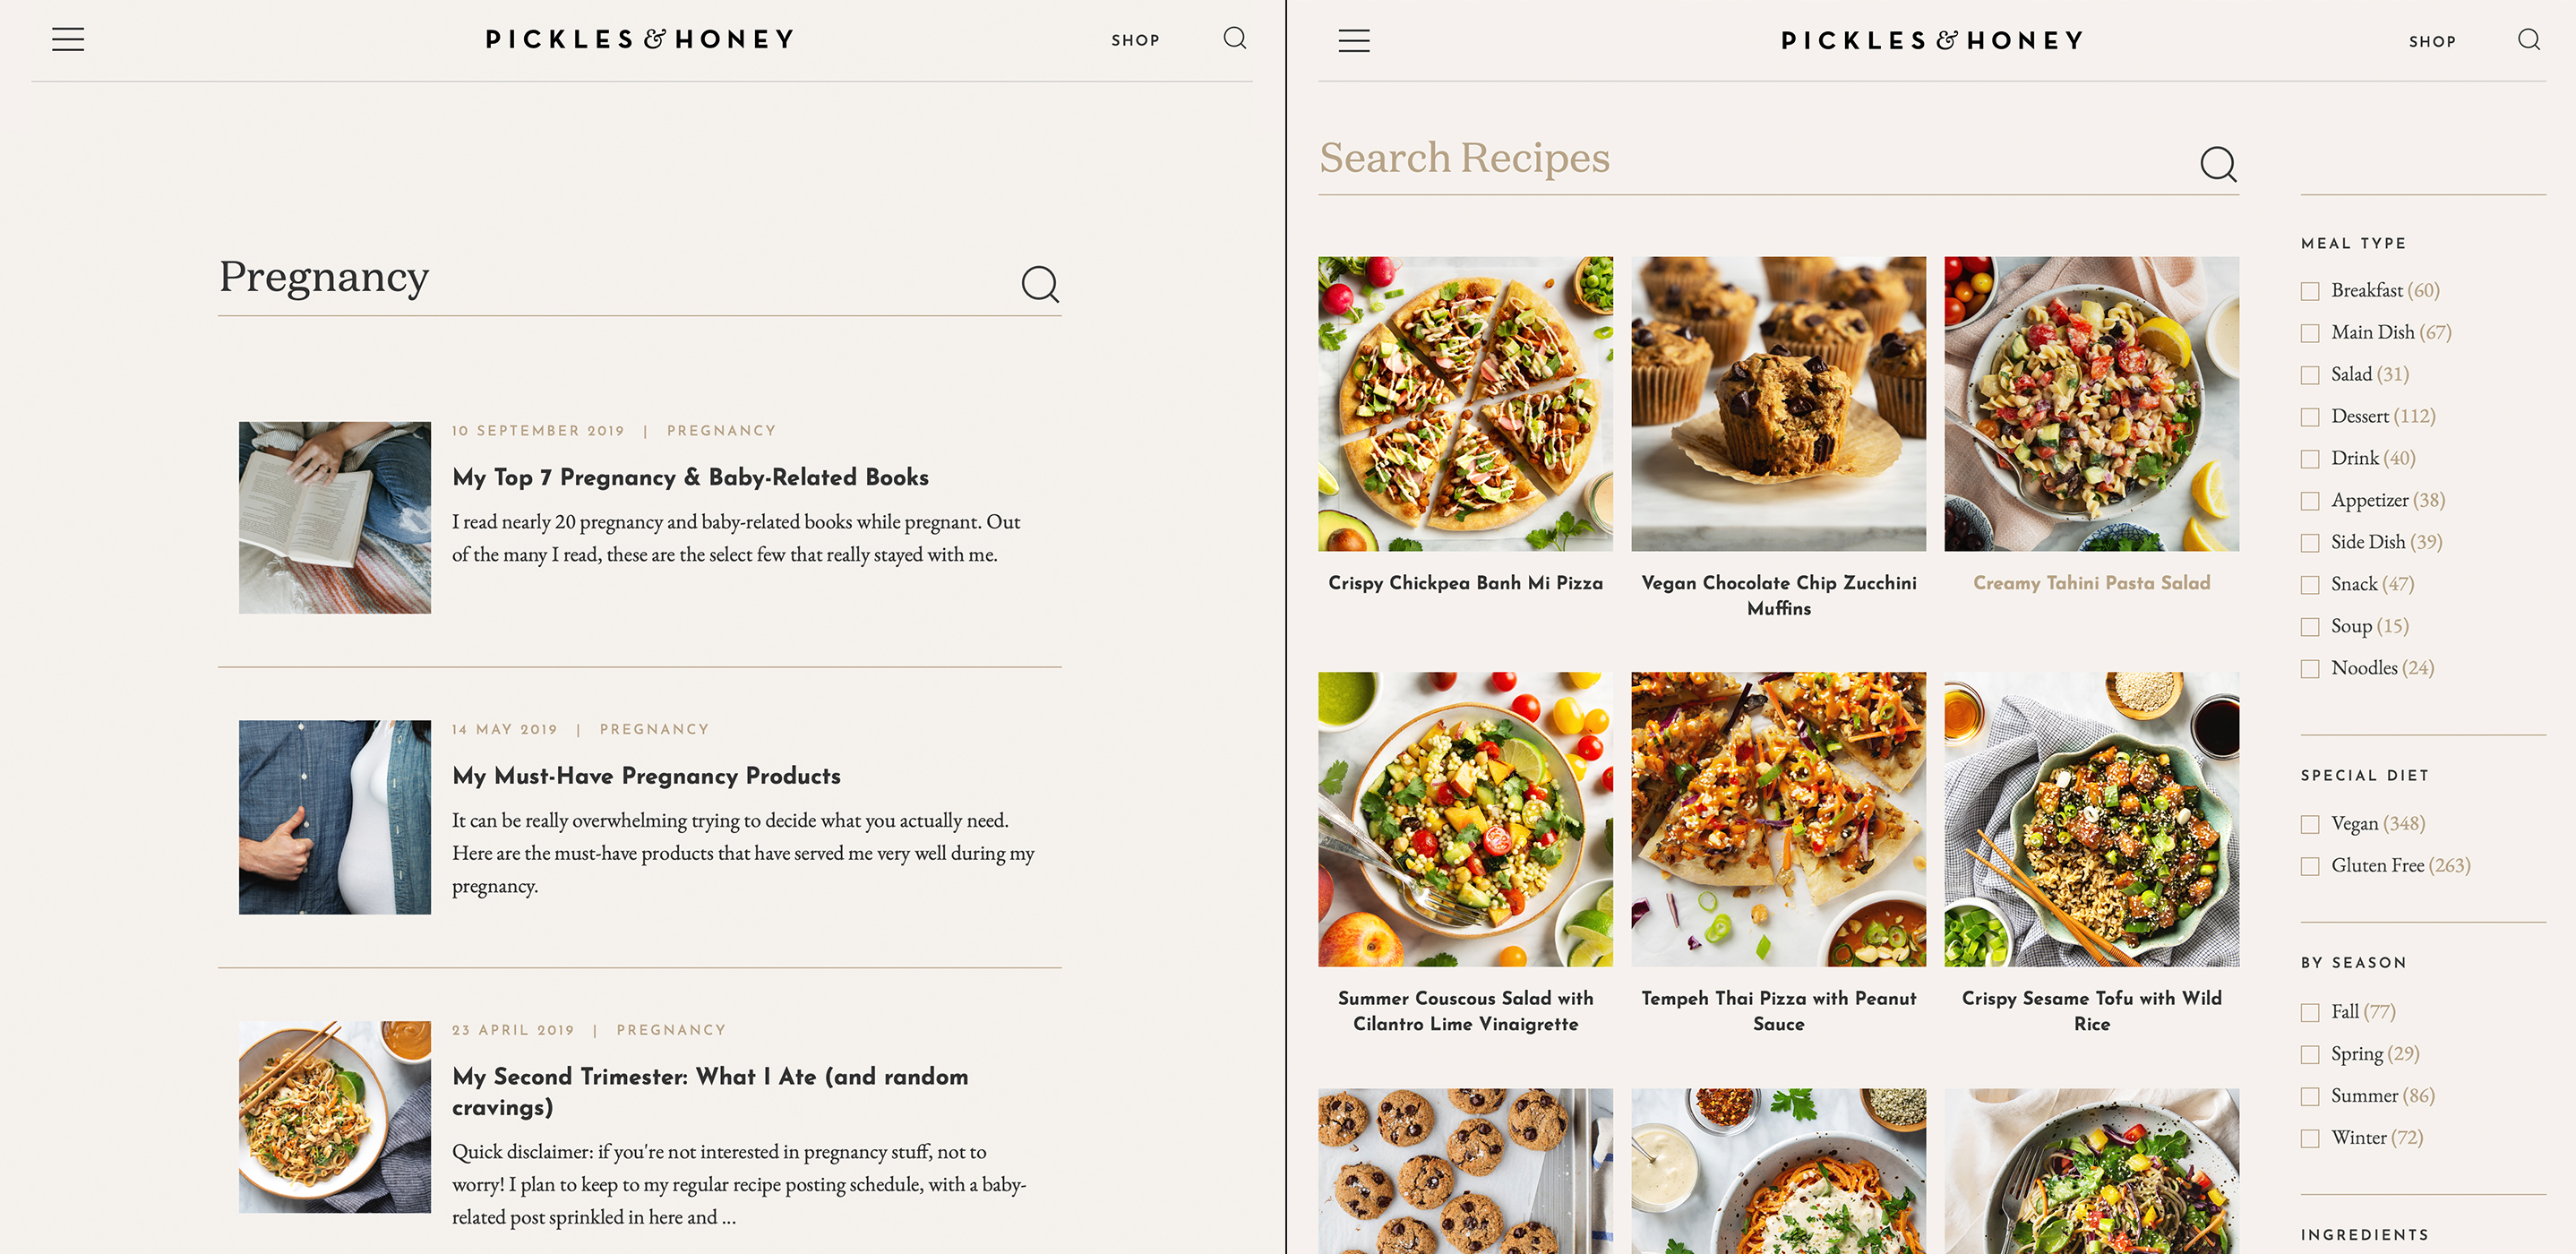 Pickles & Honey search page designs